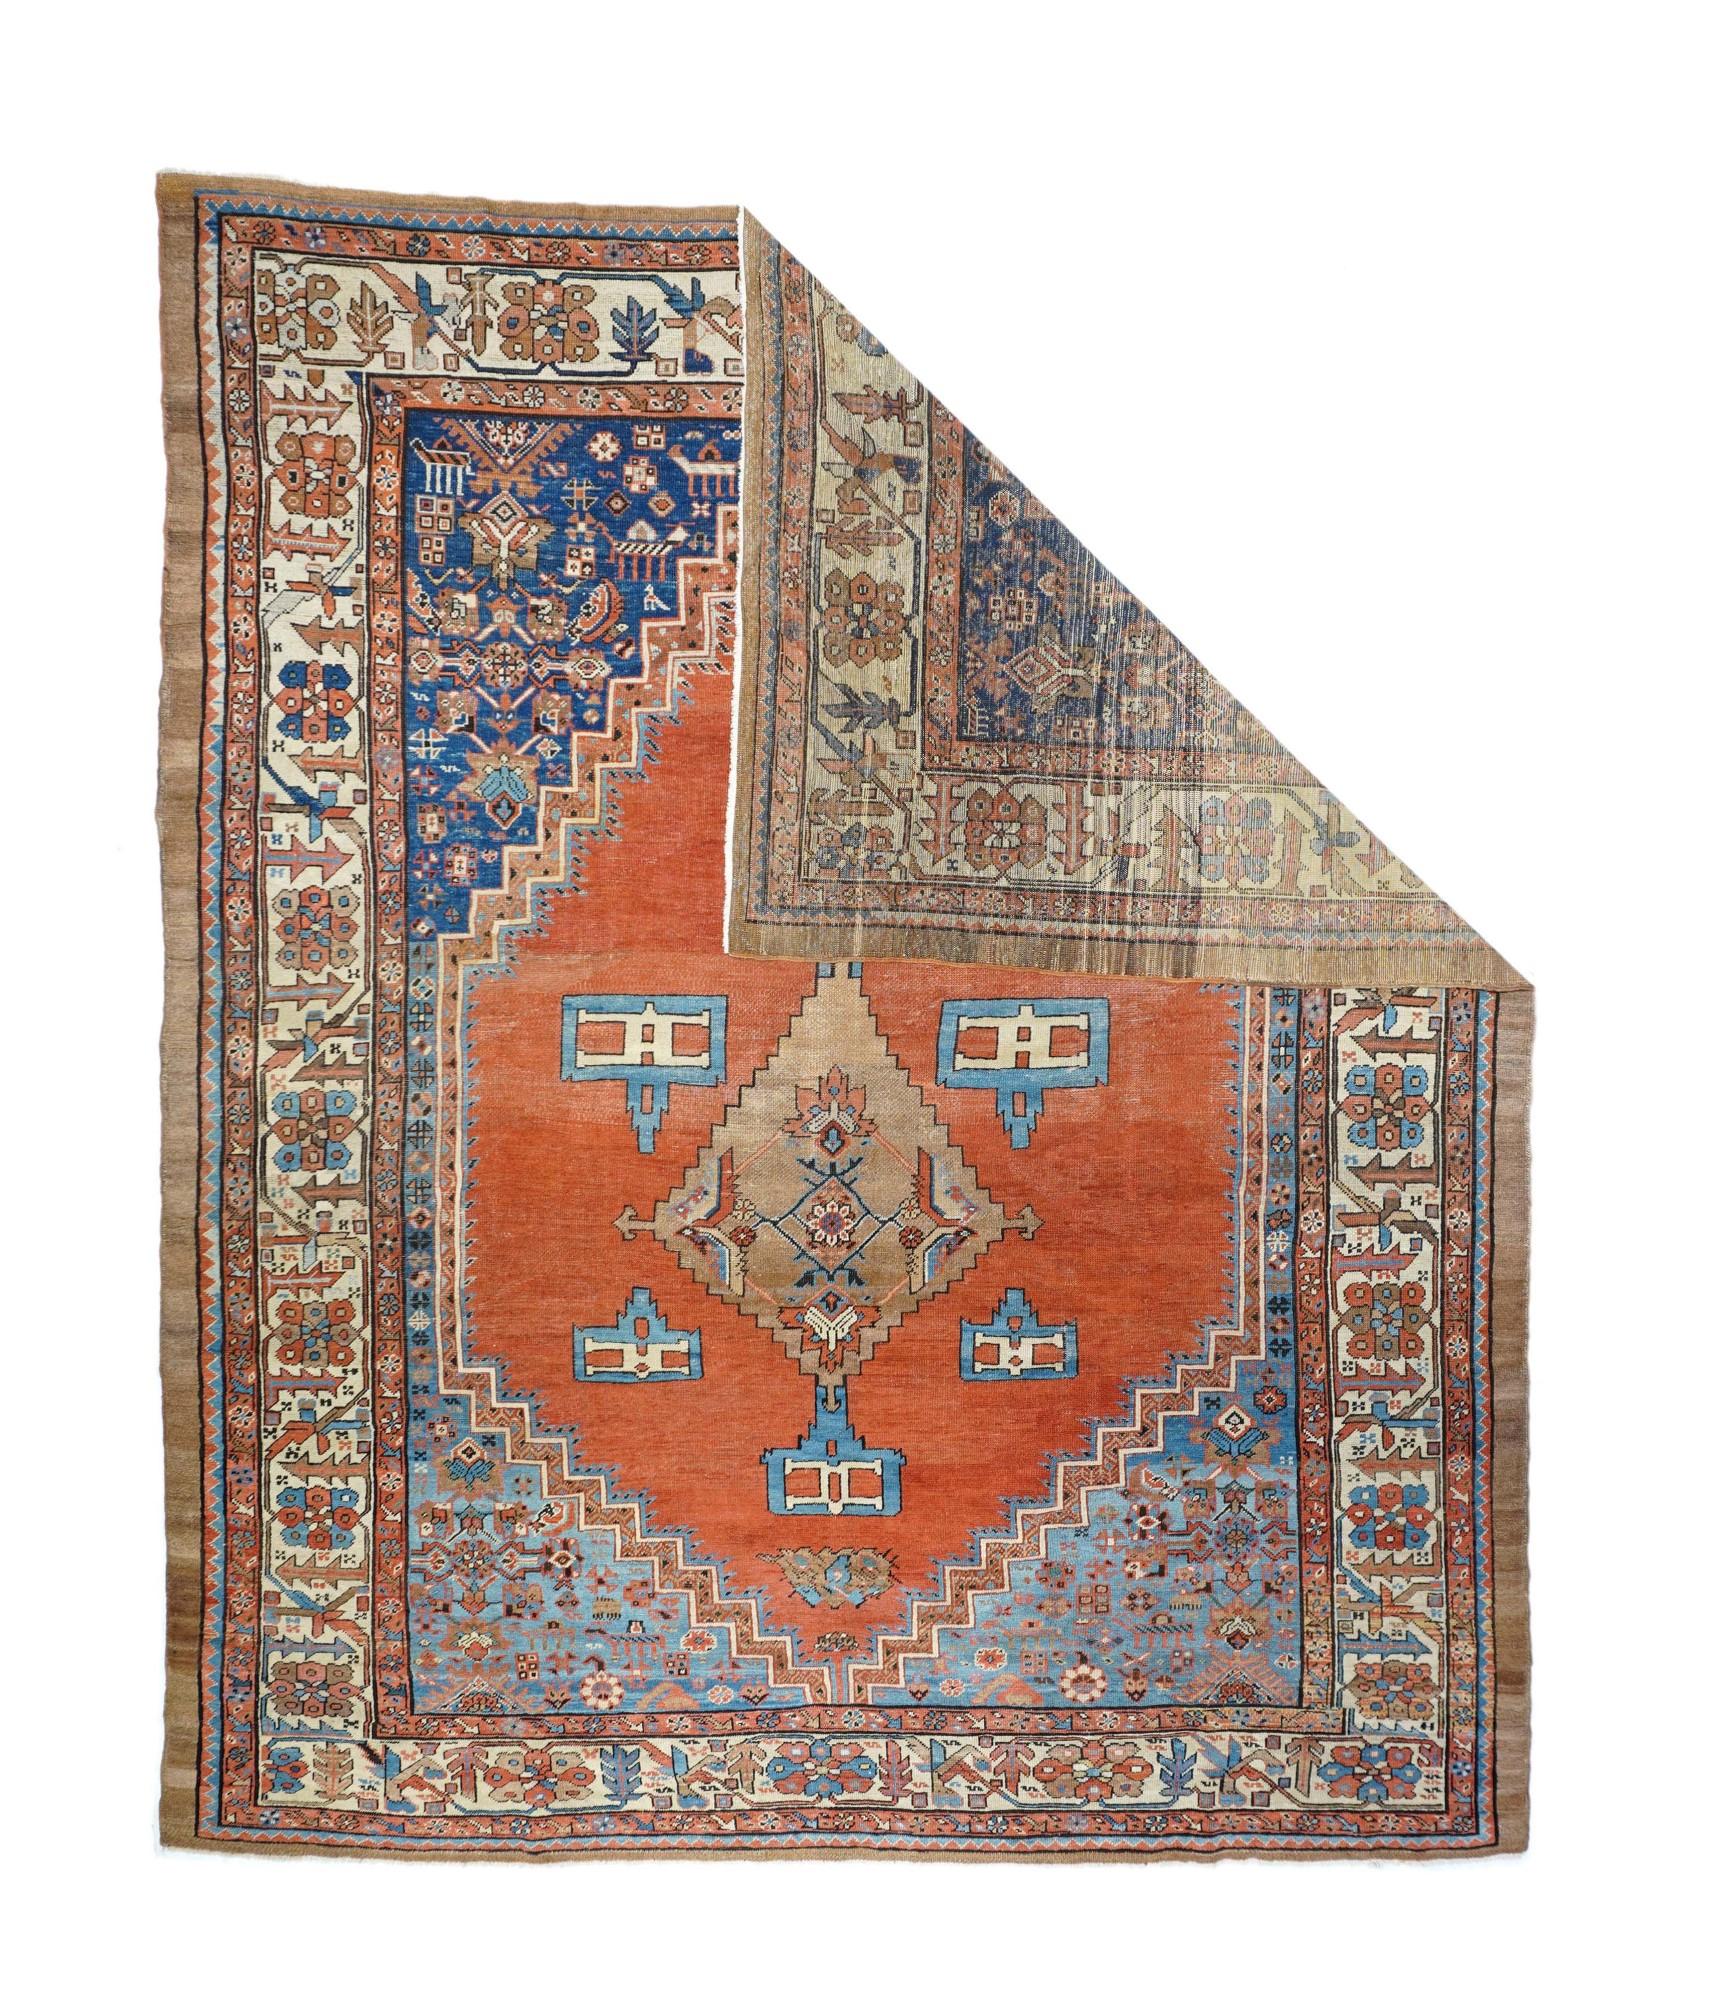 This C. 1880 Heriz carpet shows an amusingly downset rust subfield, on an abrashed light to medium blue field, enlarging to Herati and animal corners. Giant Herati nodule fills the centre of the stepped salmon medallion. Six rectangular light blue